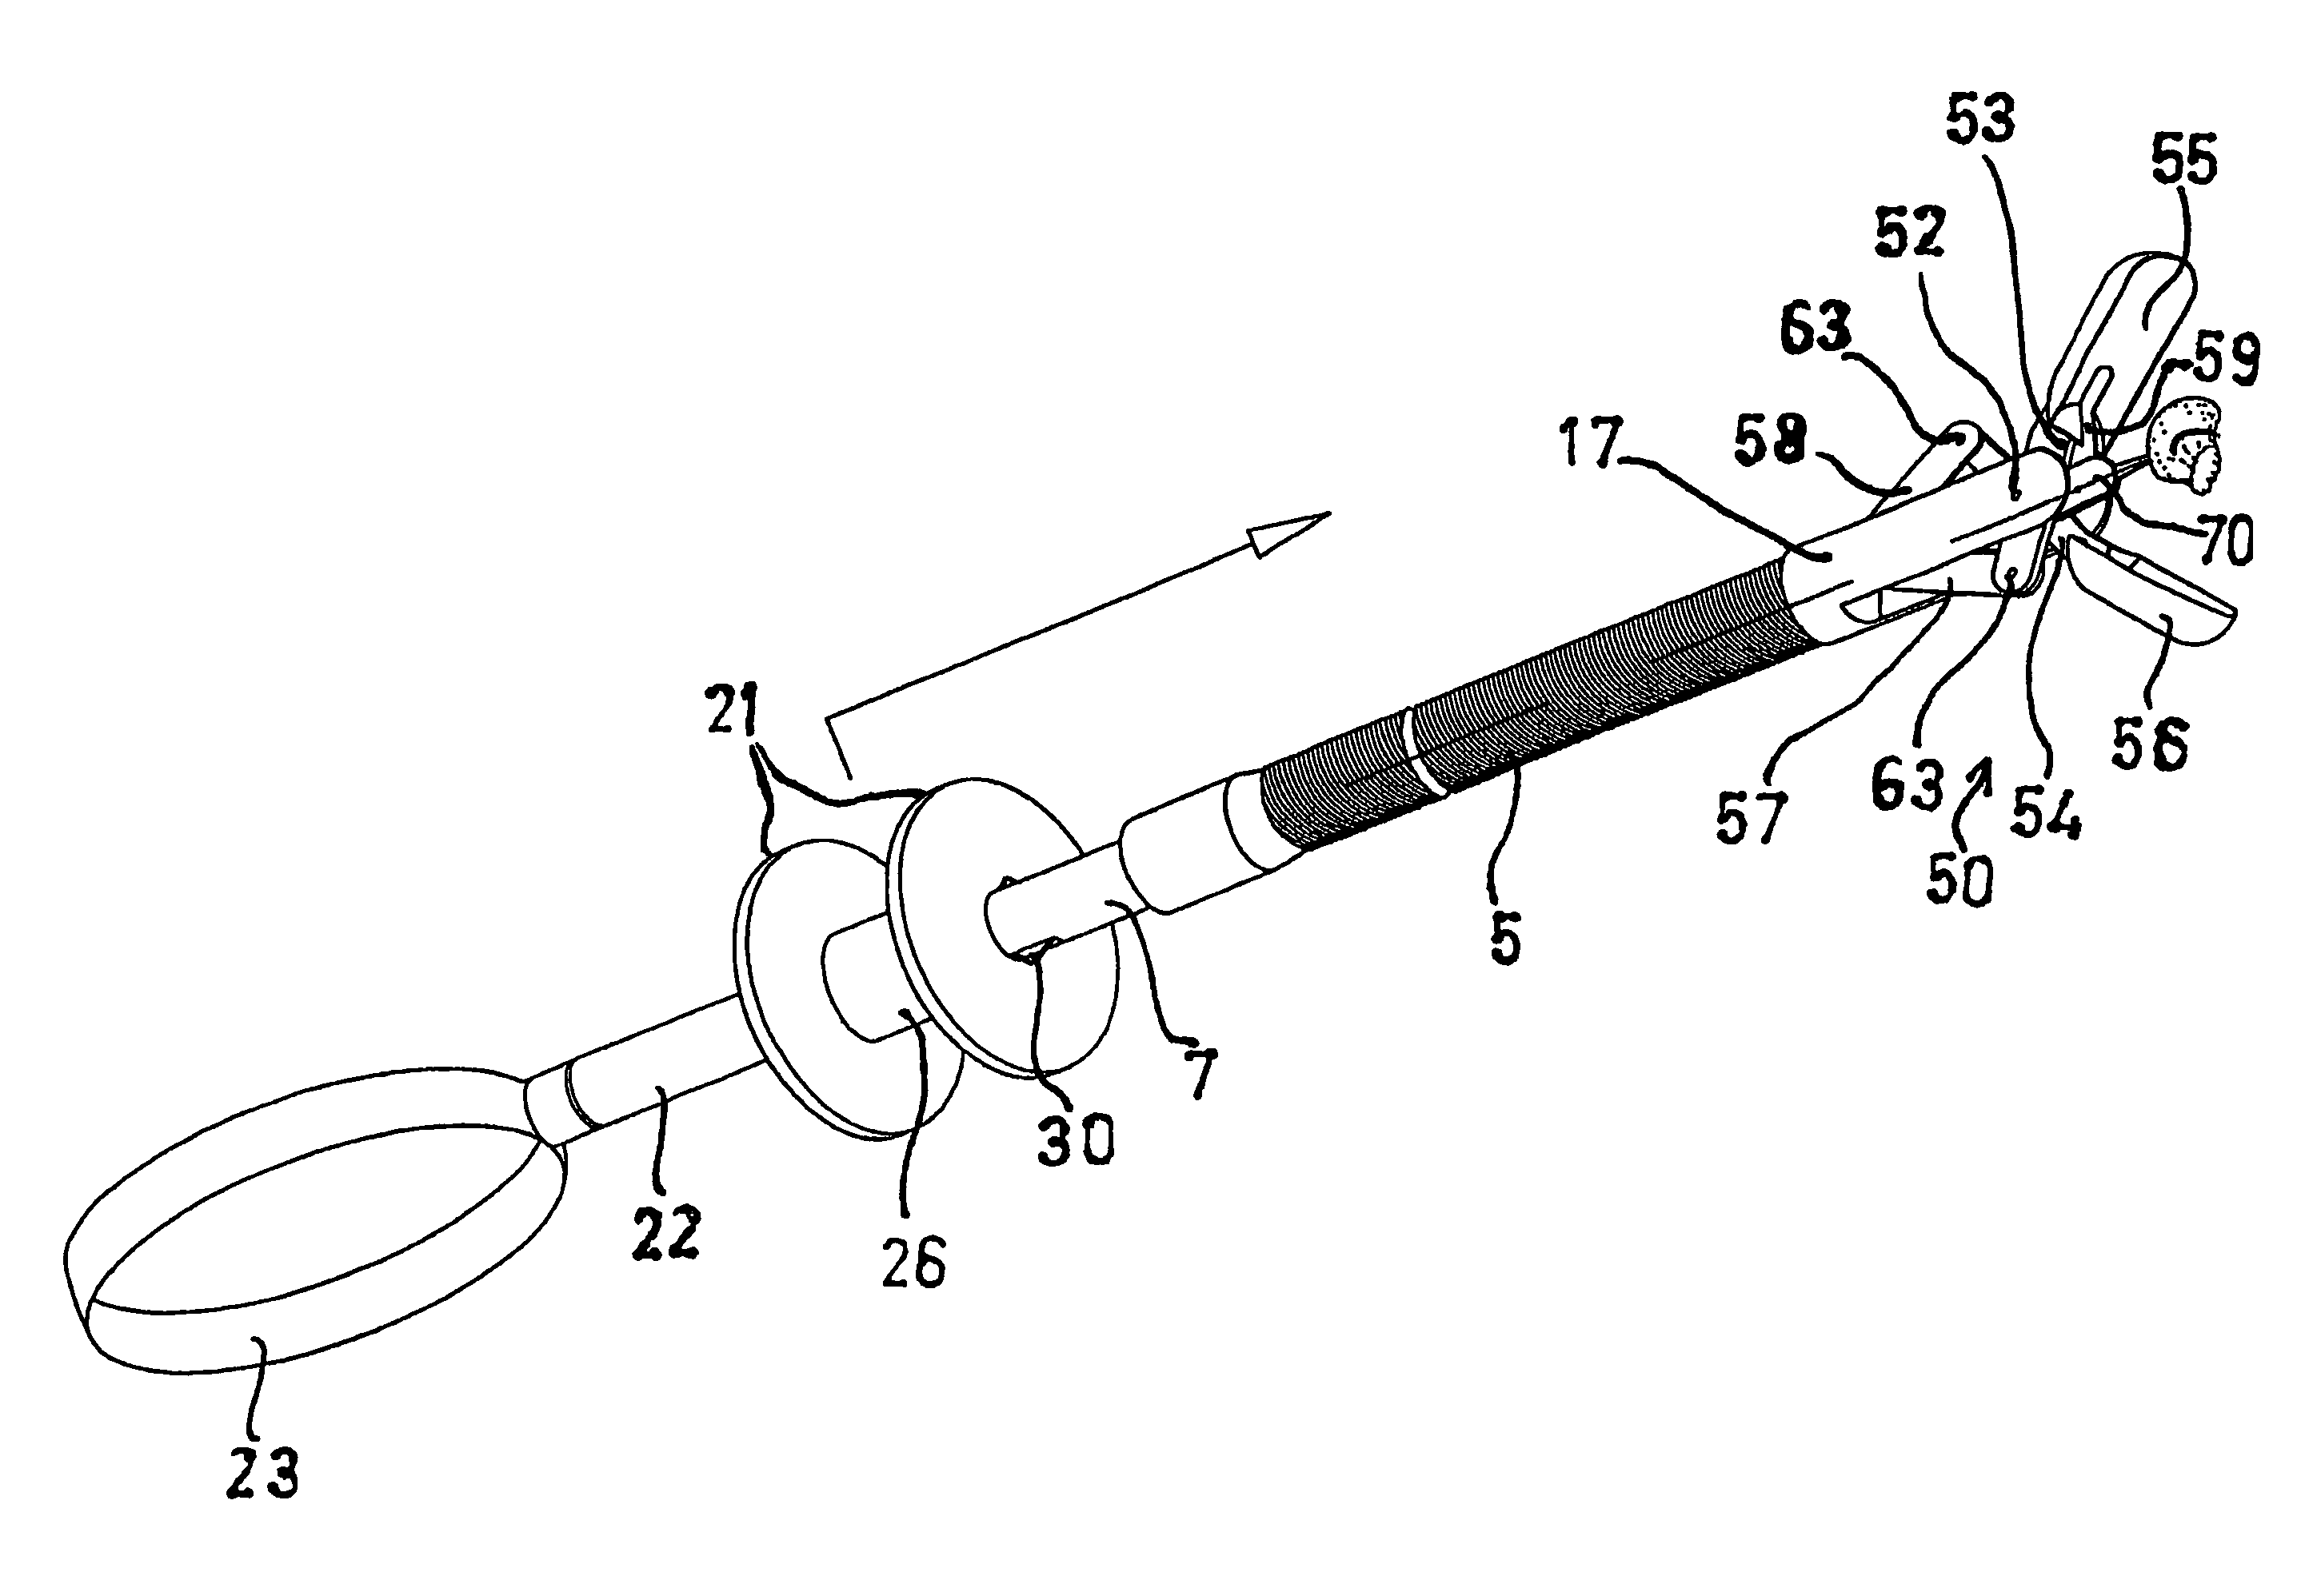 Needle biopsy forceps with integral sample ejector